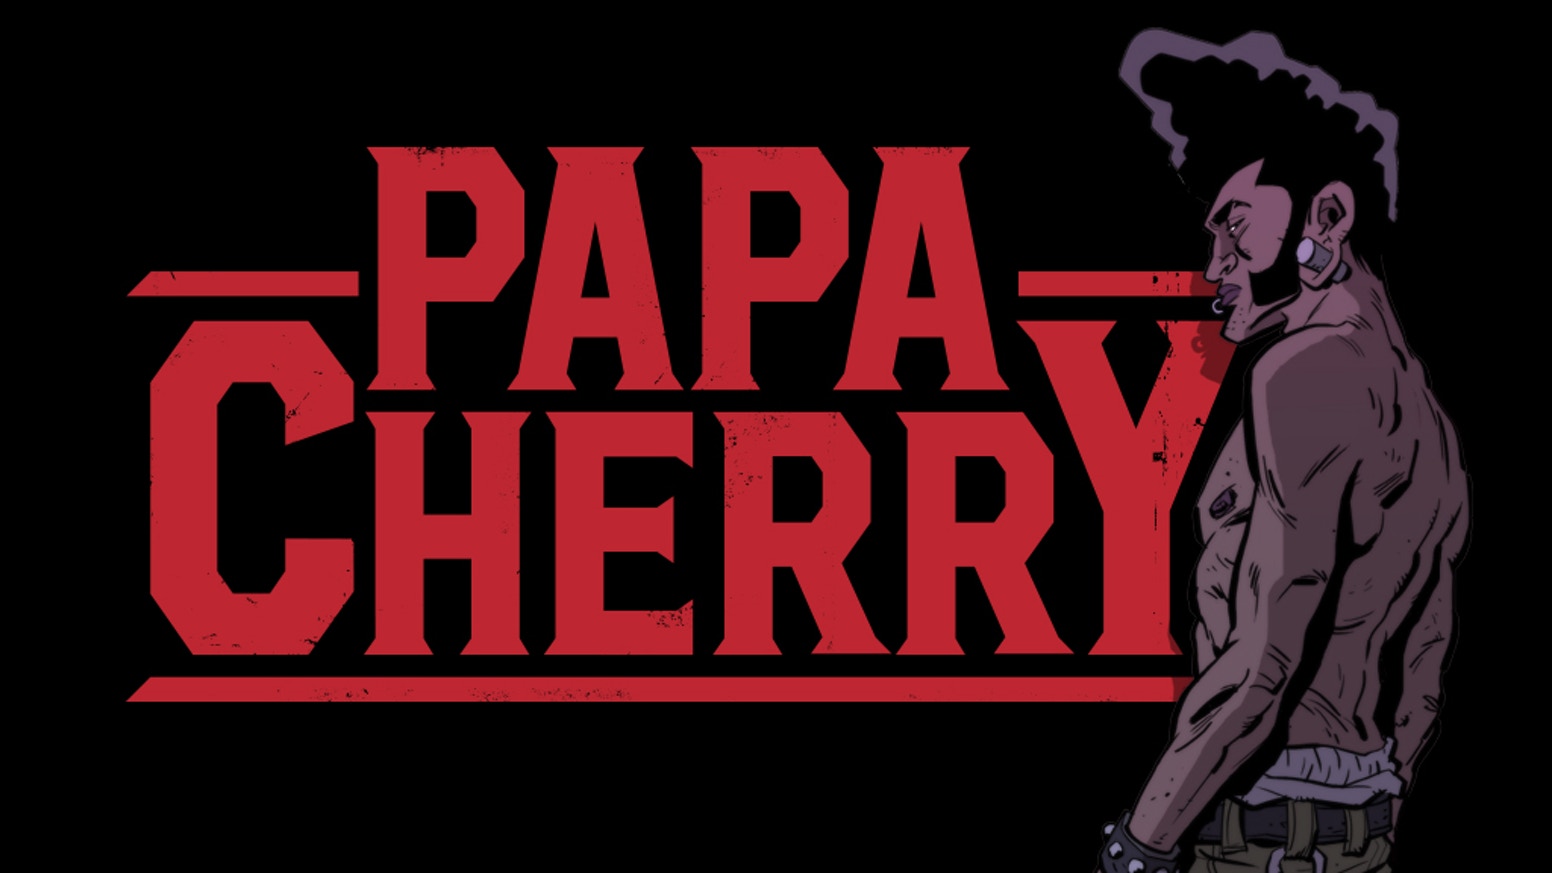 Papa Cherry: The Devil, A Guitar, And Rock N Roll [Exclusive Interview] | GalaxyCon 2019